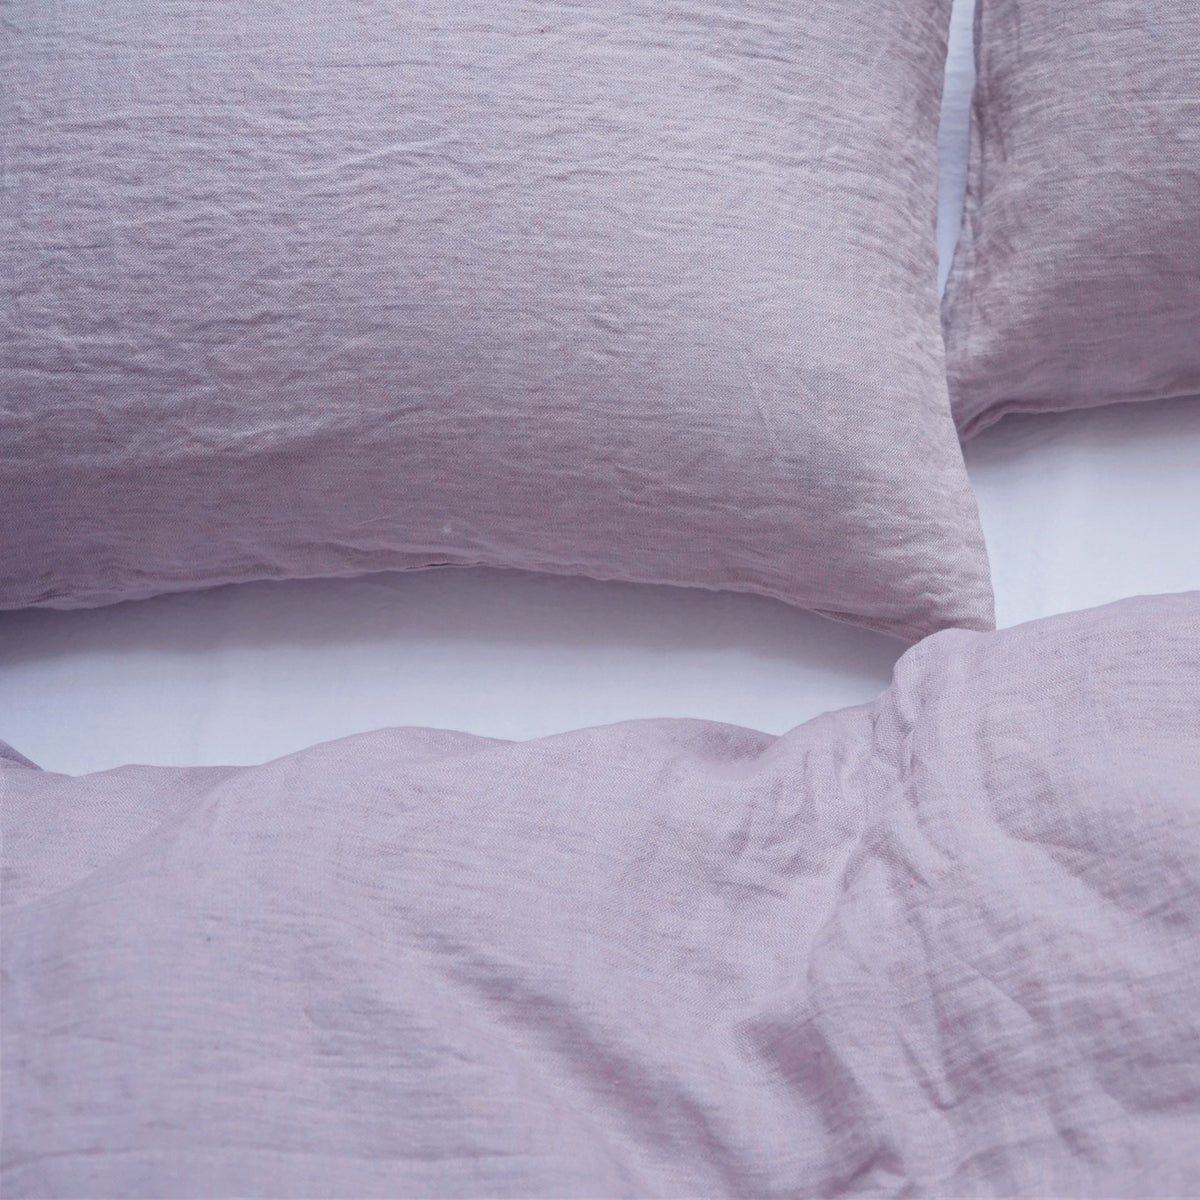 lilac pillow cases